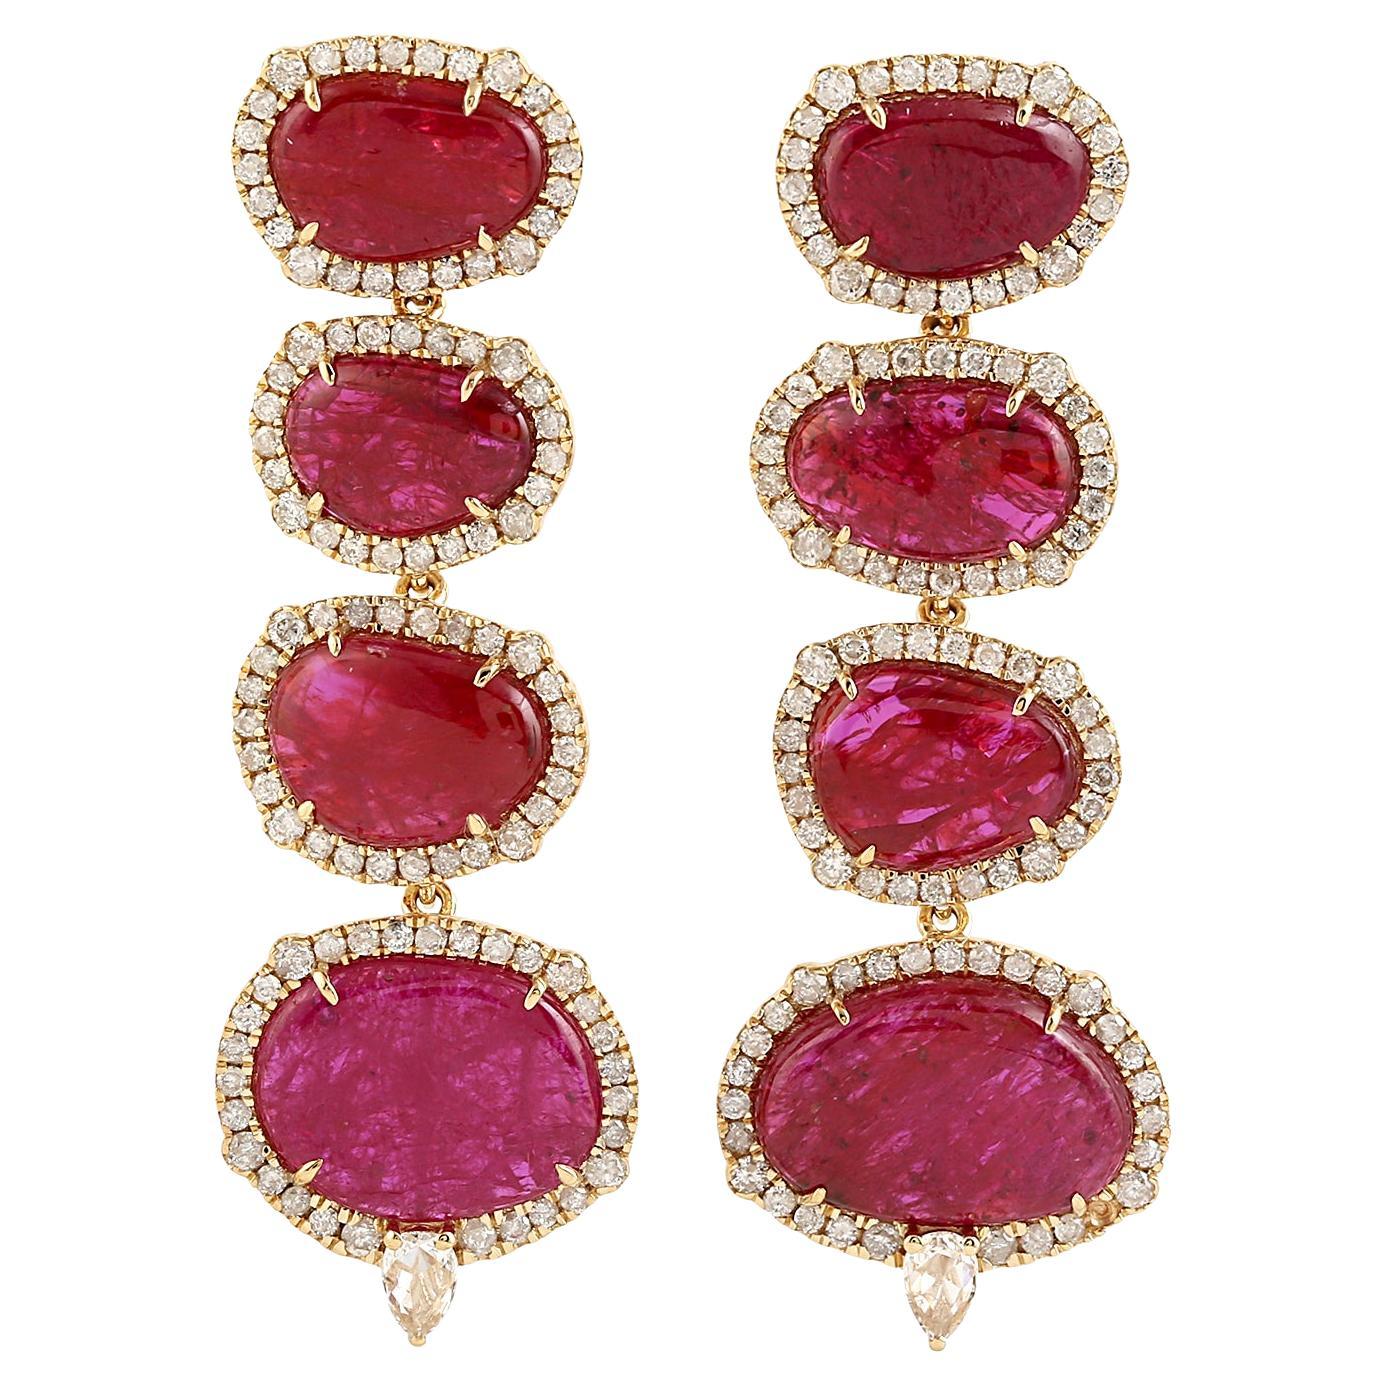 14.43 ct Ruby Dangle Earrings With Diamonds Made In 18k Yellow Gold For Sale